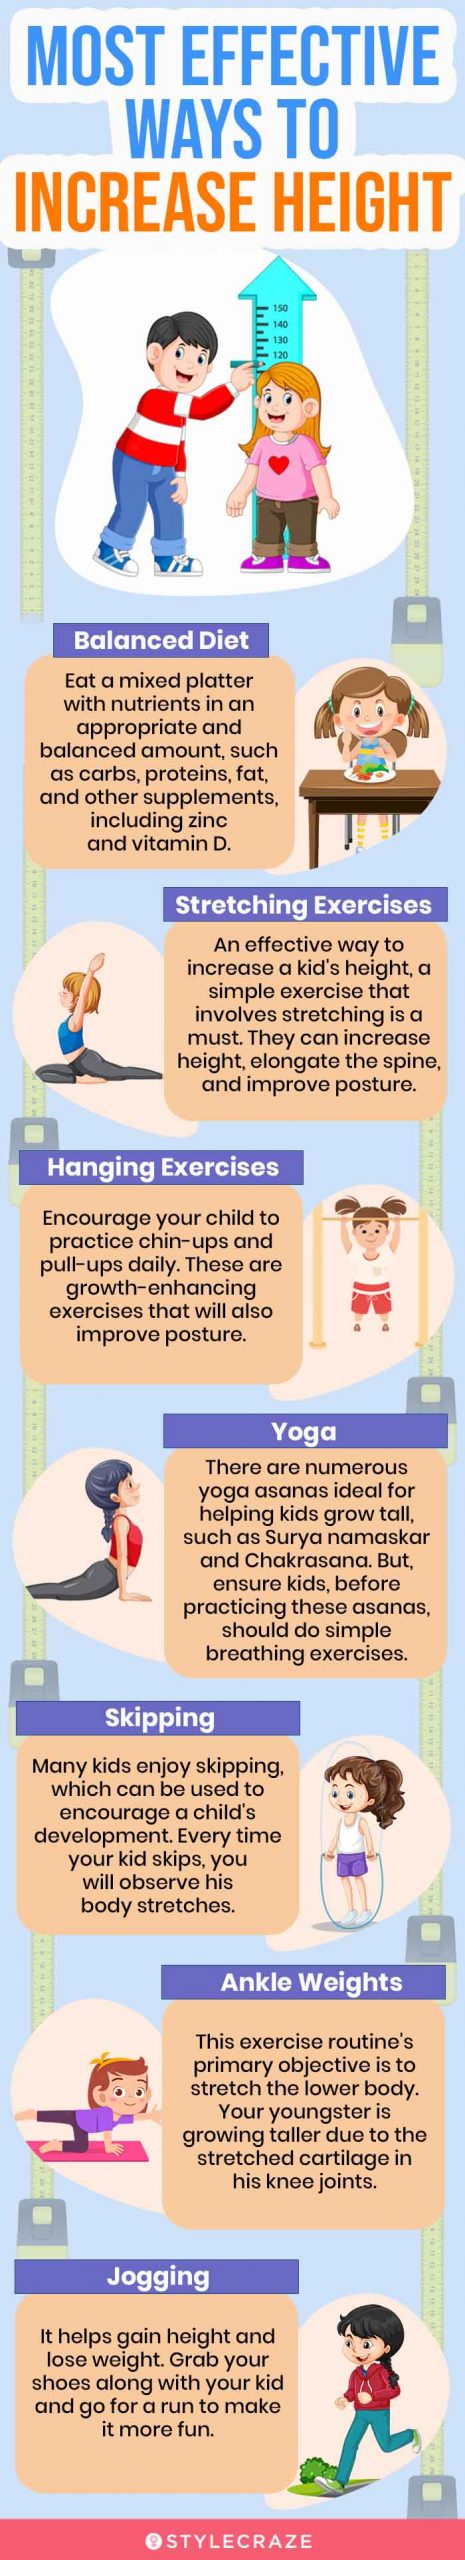 most effective ways to increase height (infographic)